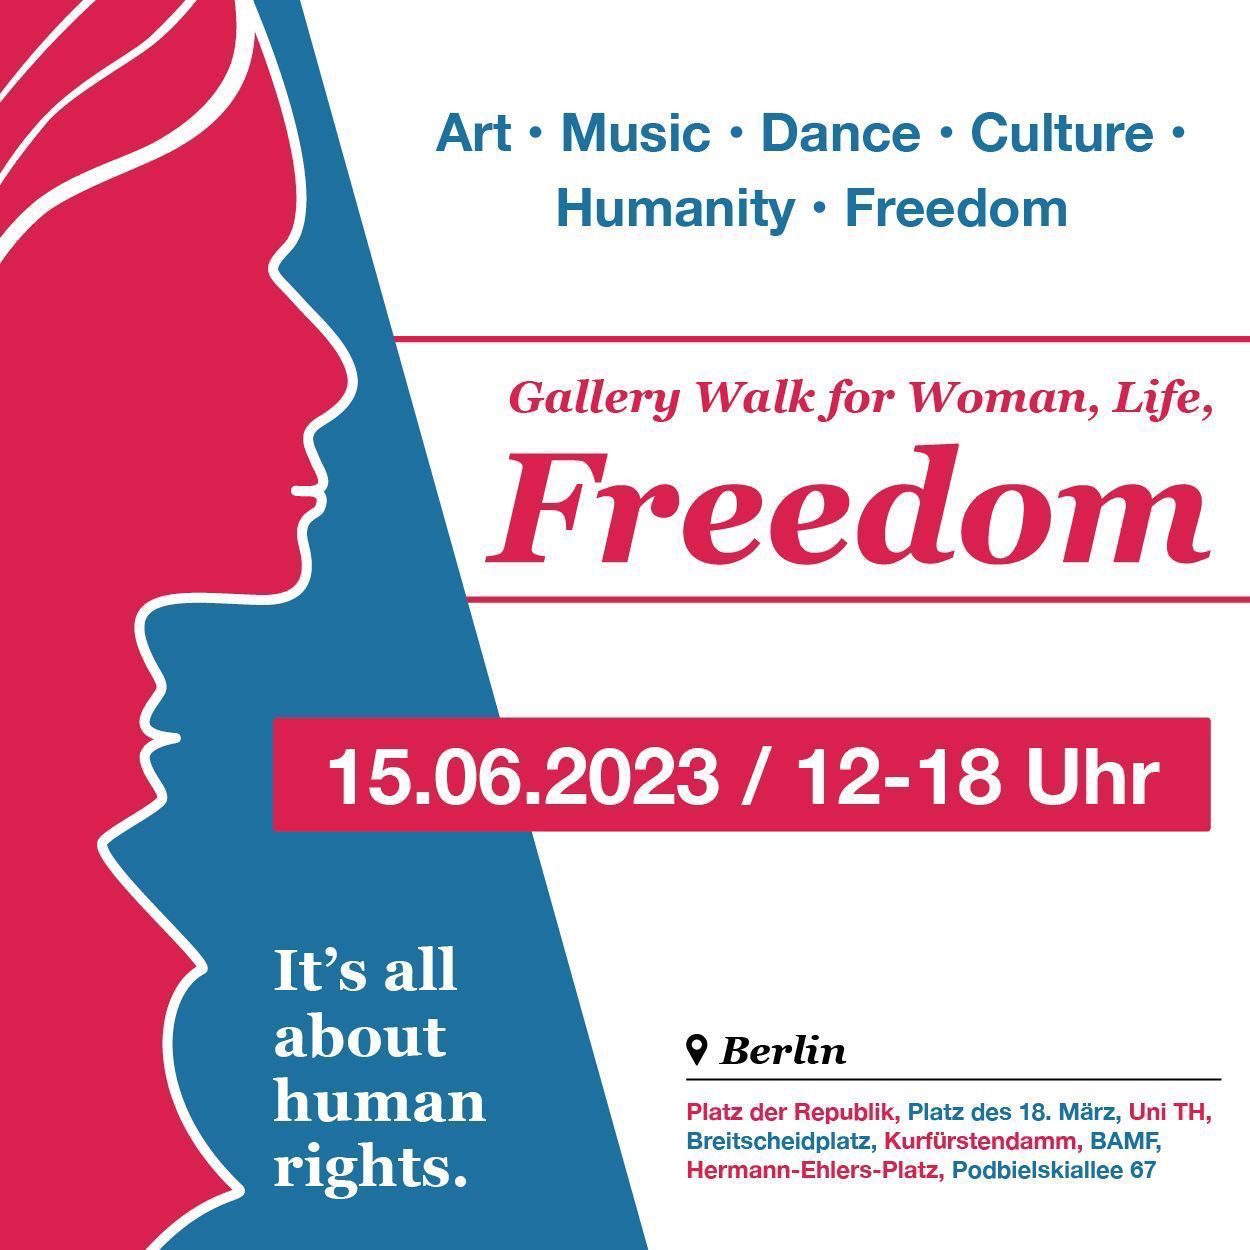 Gallery Walk for Woman, Life, Freedom